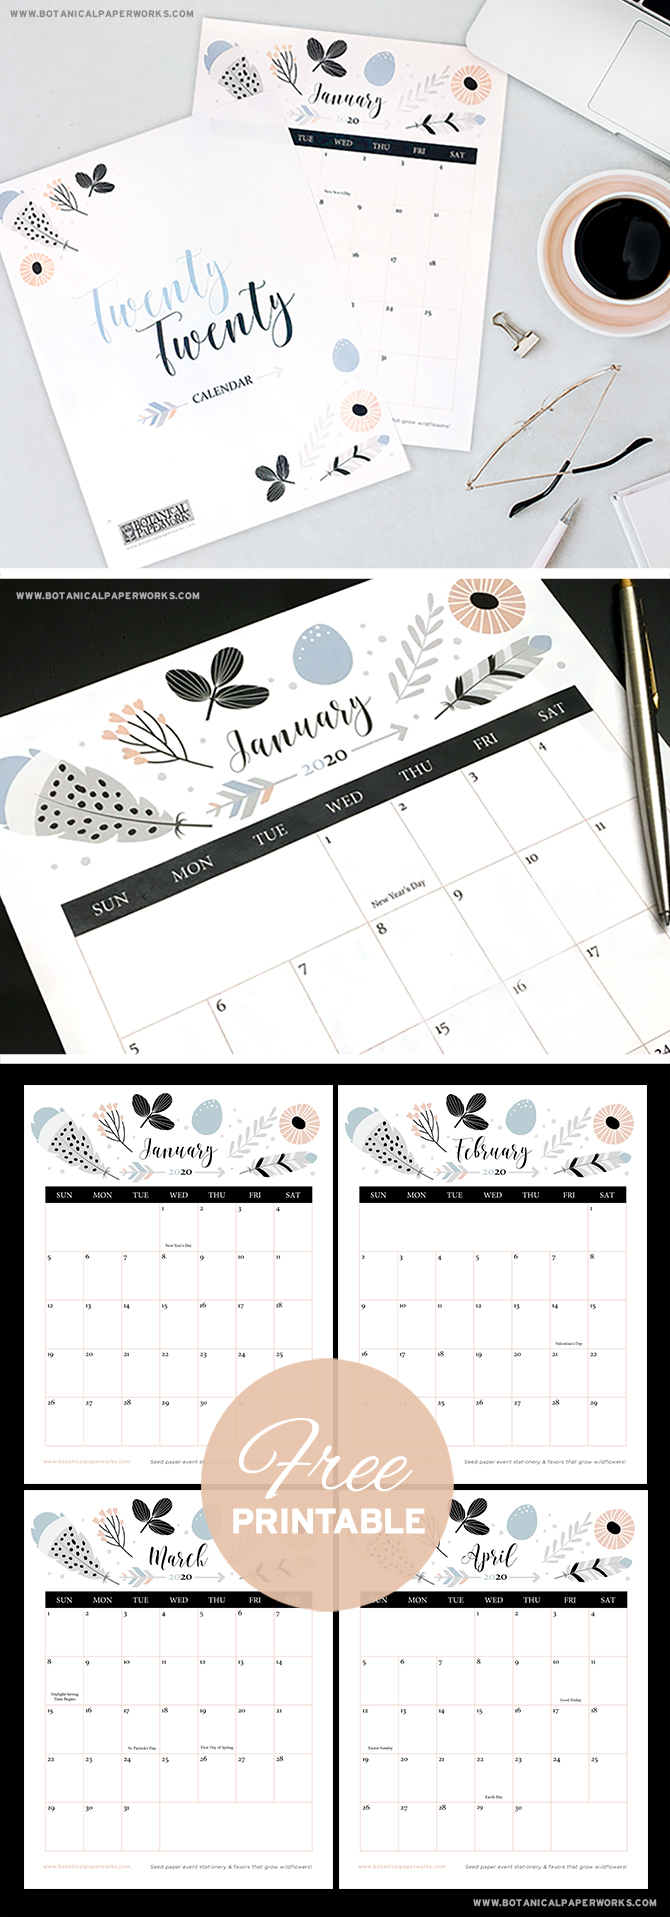 Download and print this stylish Boho Chic calendar to keep track of all your events and appointments in 2020.